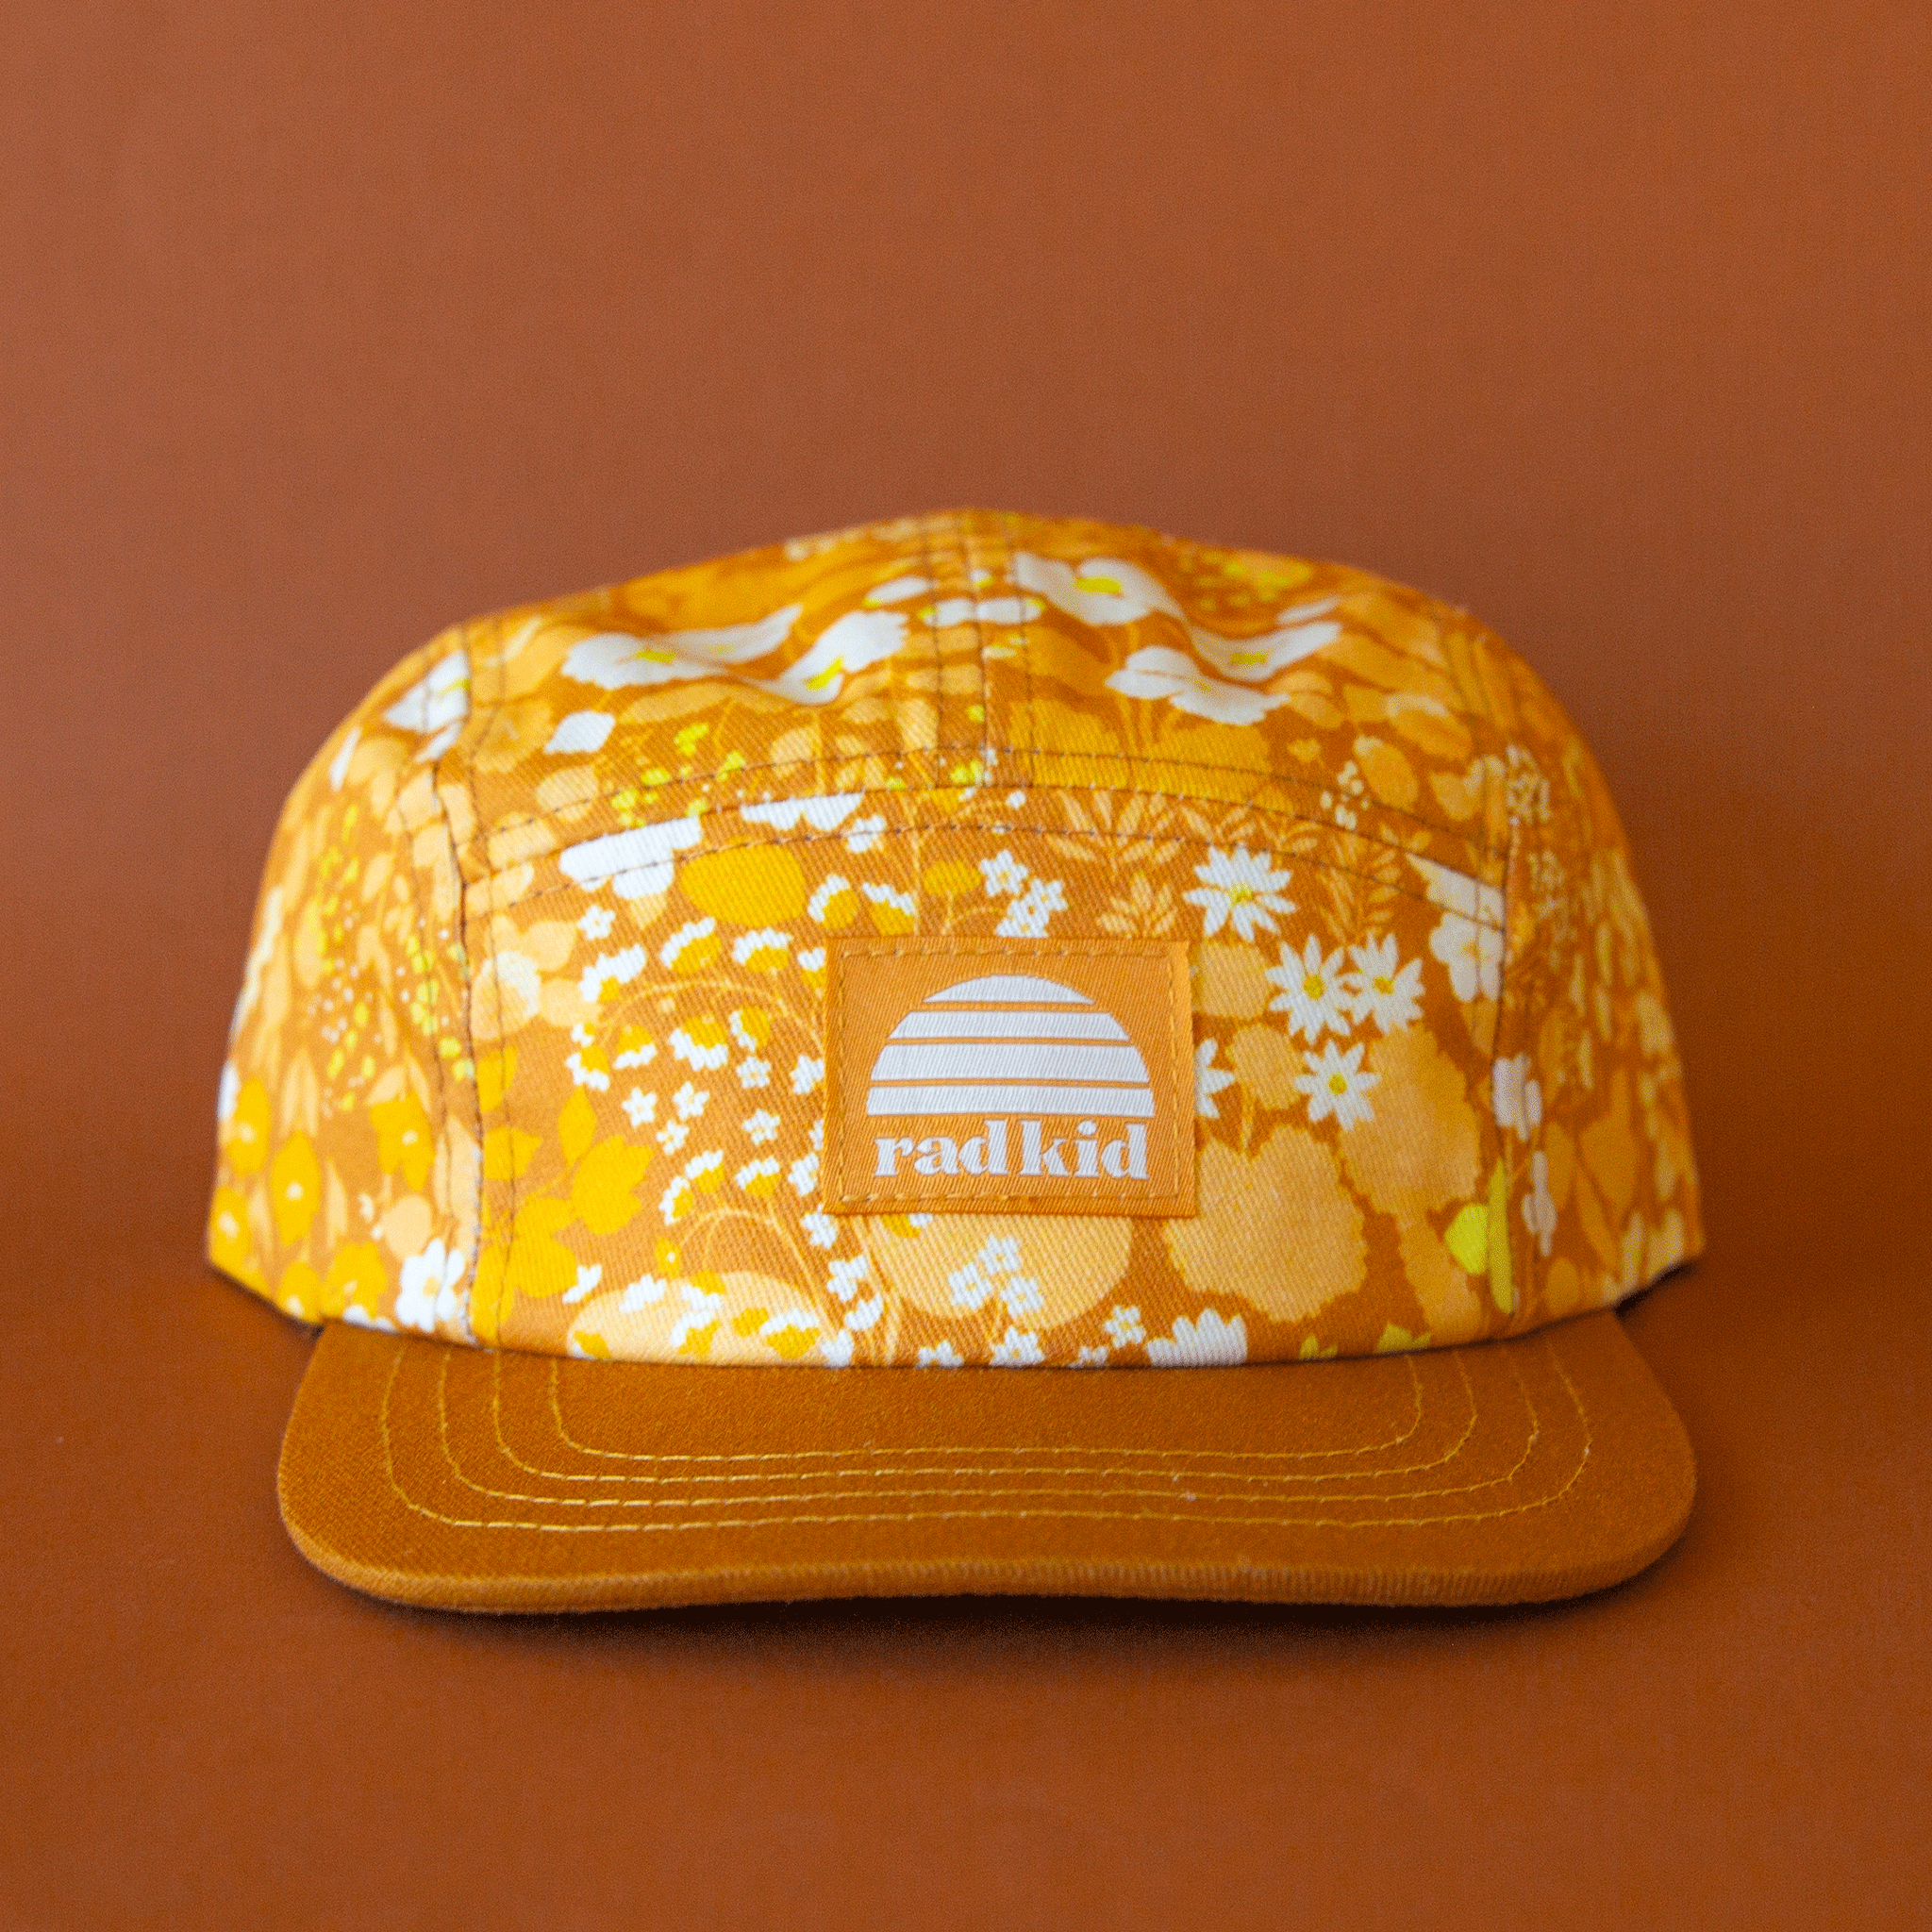 On a burnt orange background is a yellow and brown floral print hat with a square label on the front that reads, "rad kid".